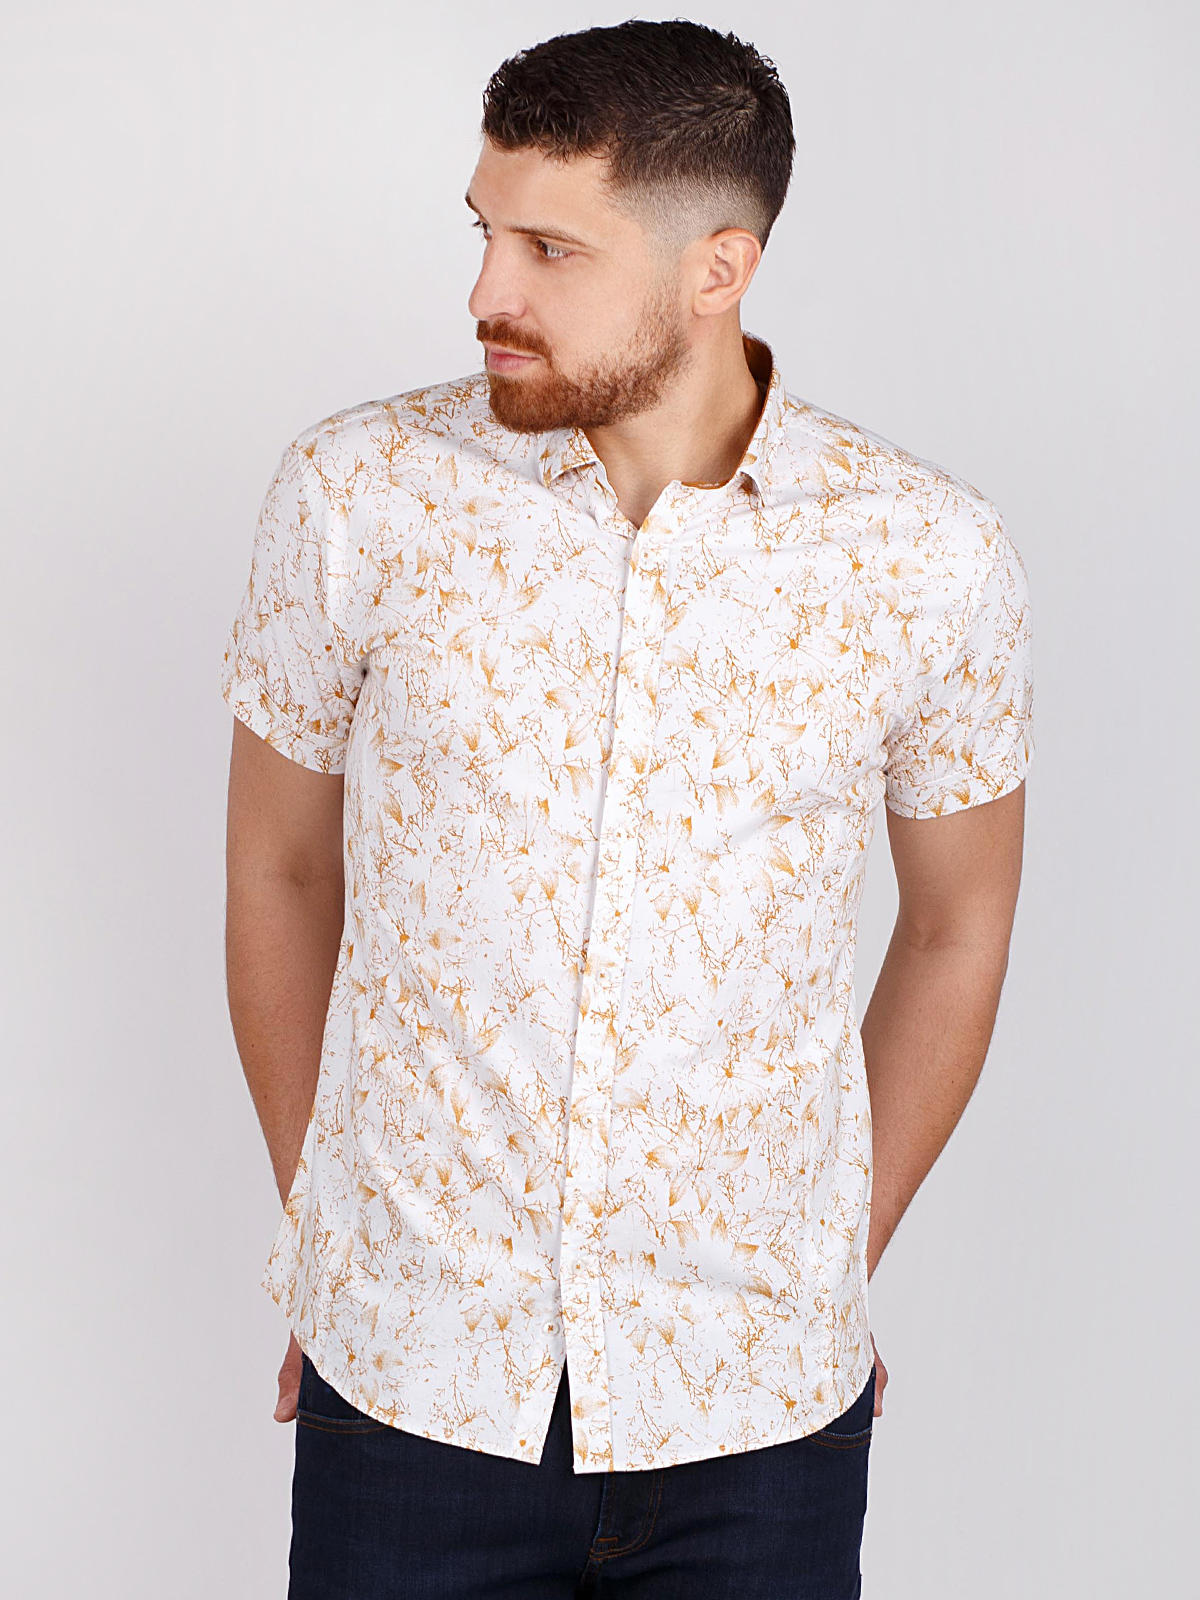 White shirt with floral print in mustard - 80219 € 16.31 img2